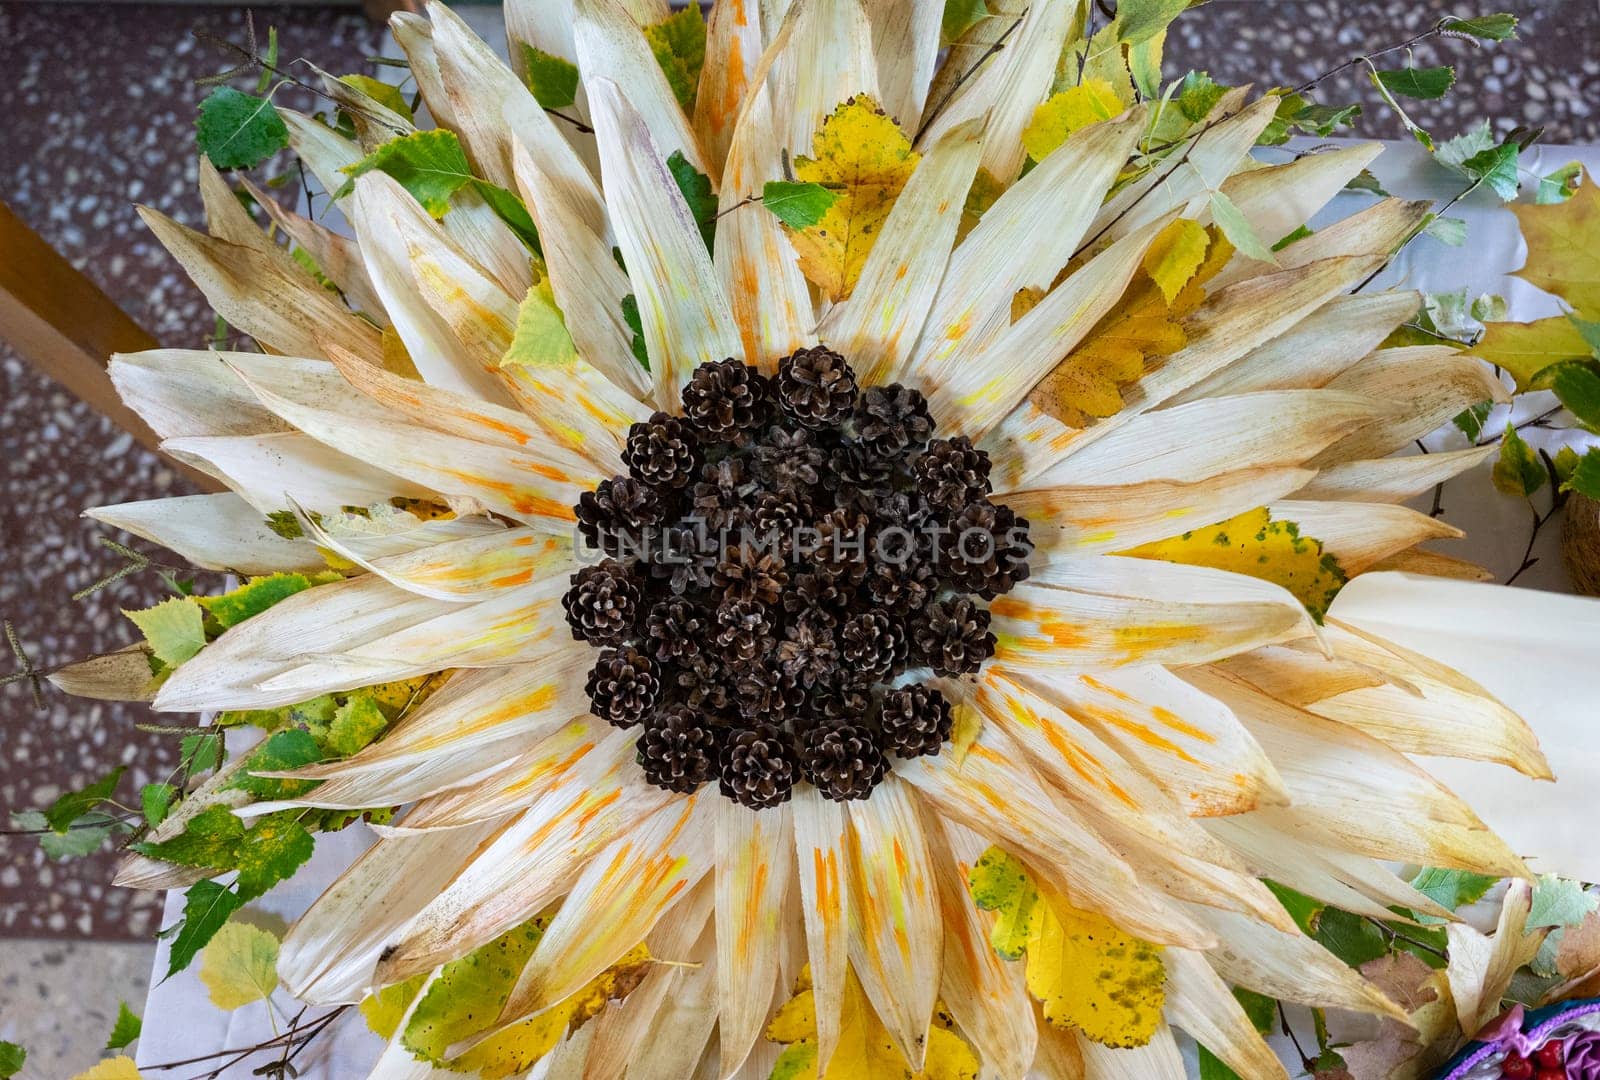 A large sunflower is made of corn cones and leaves.